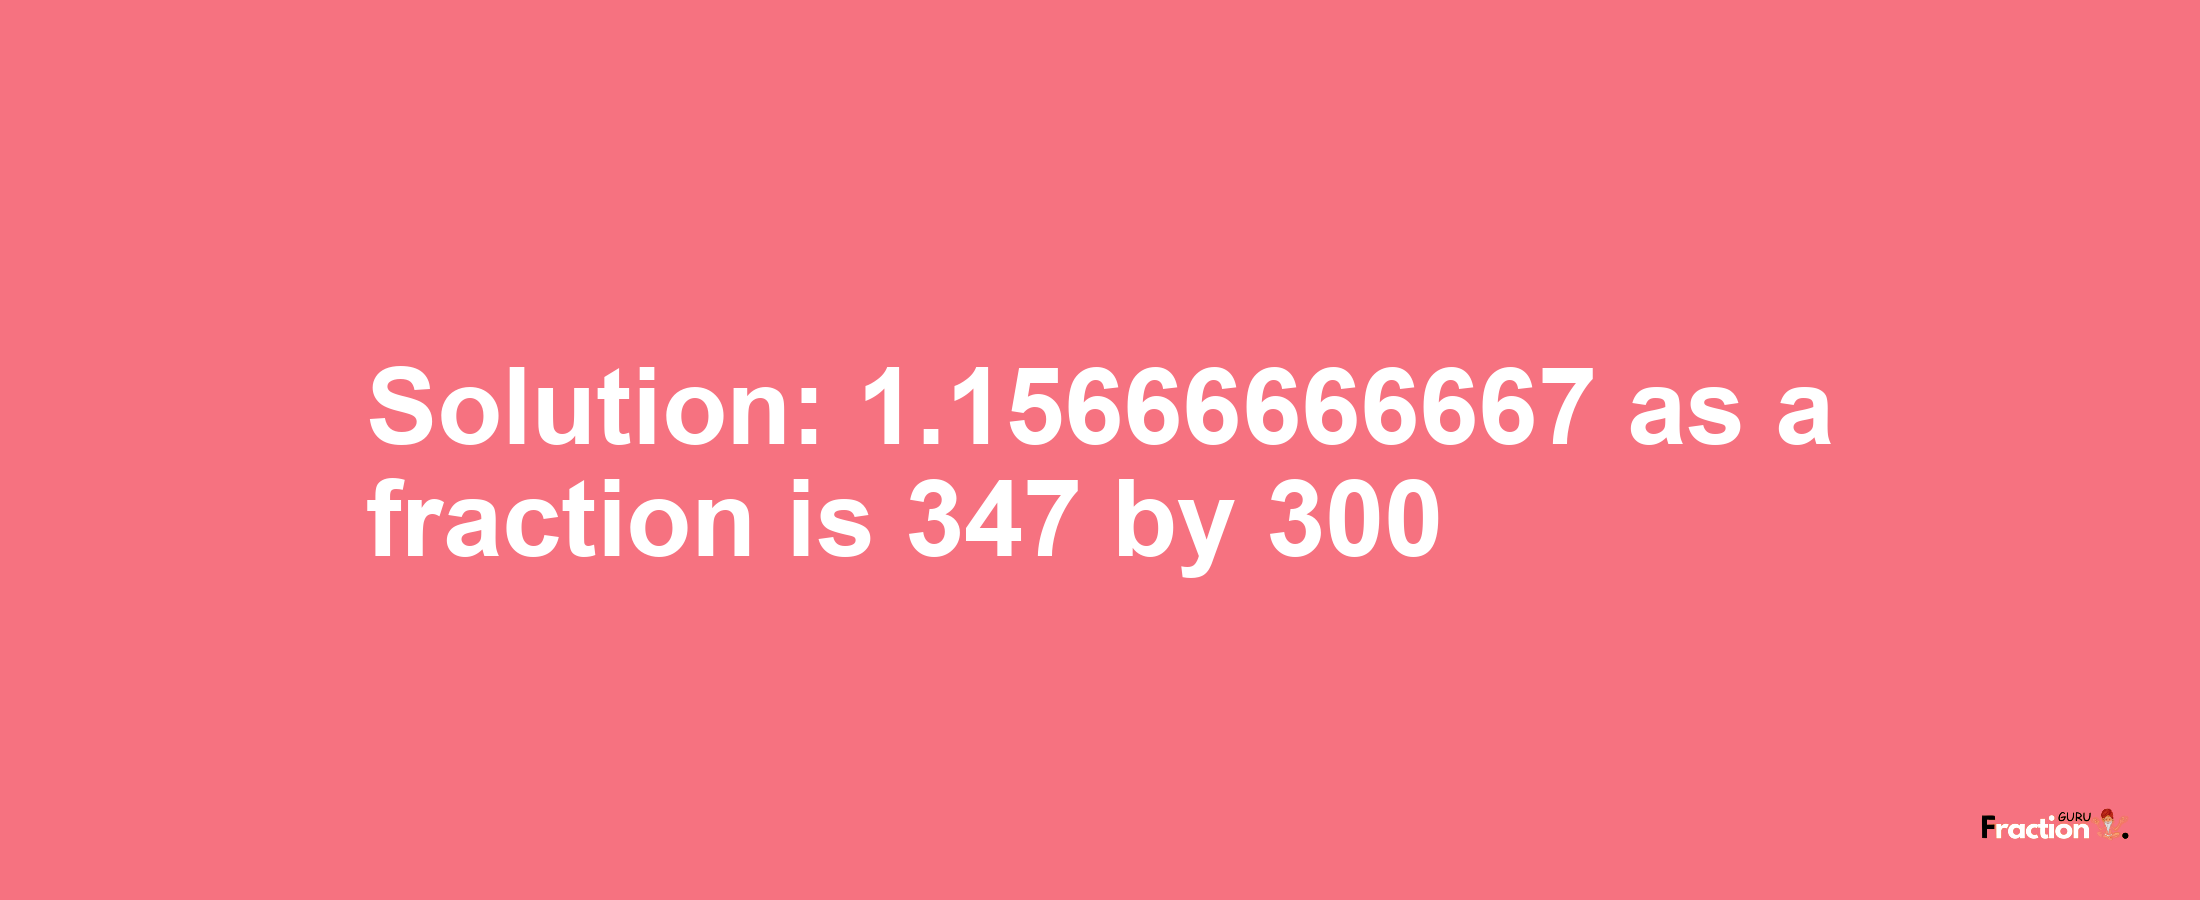 Solution:1.15666666667 as a fraction is 347/300